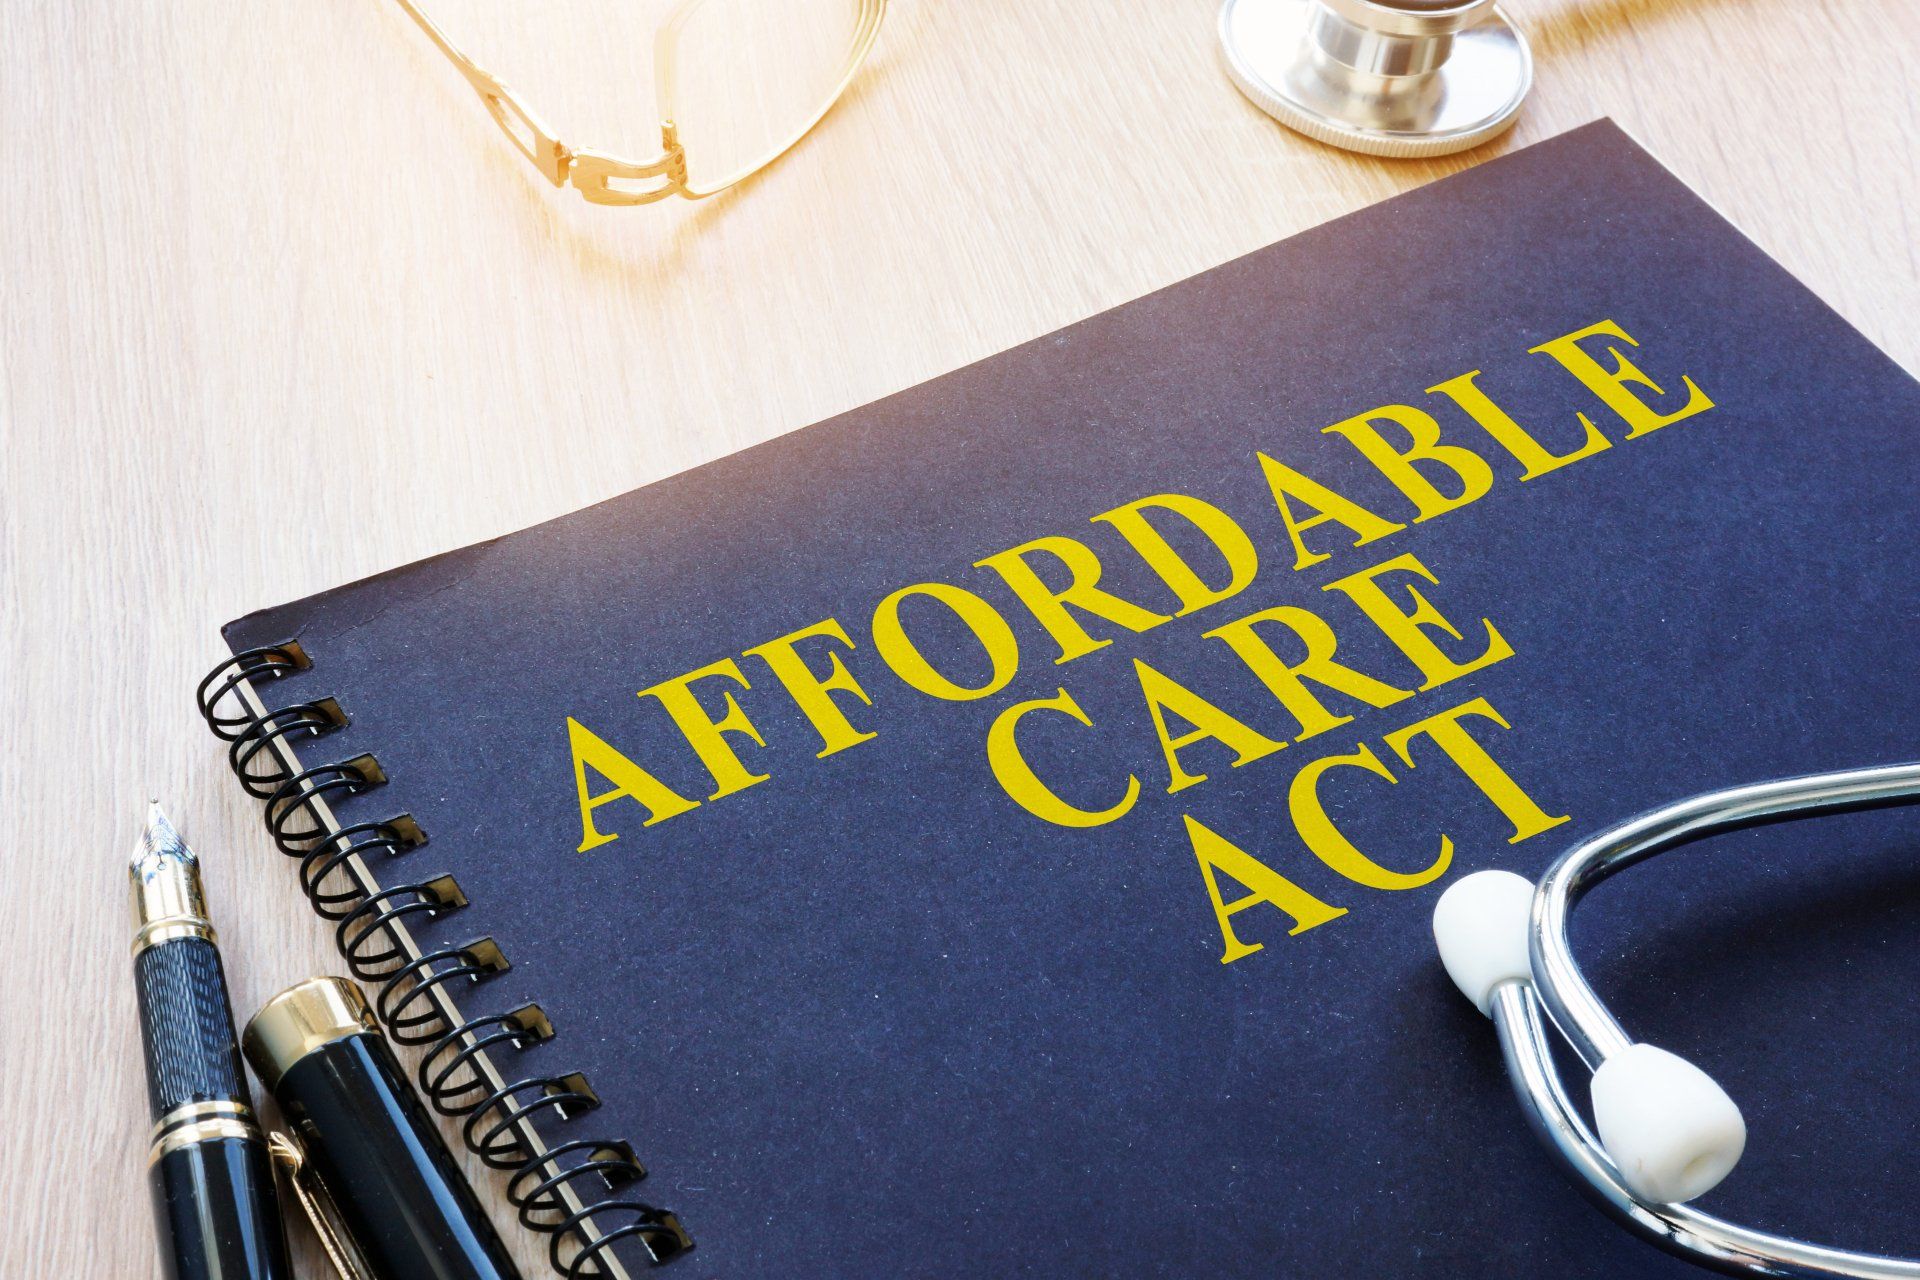 Affordable Care Act Booklet